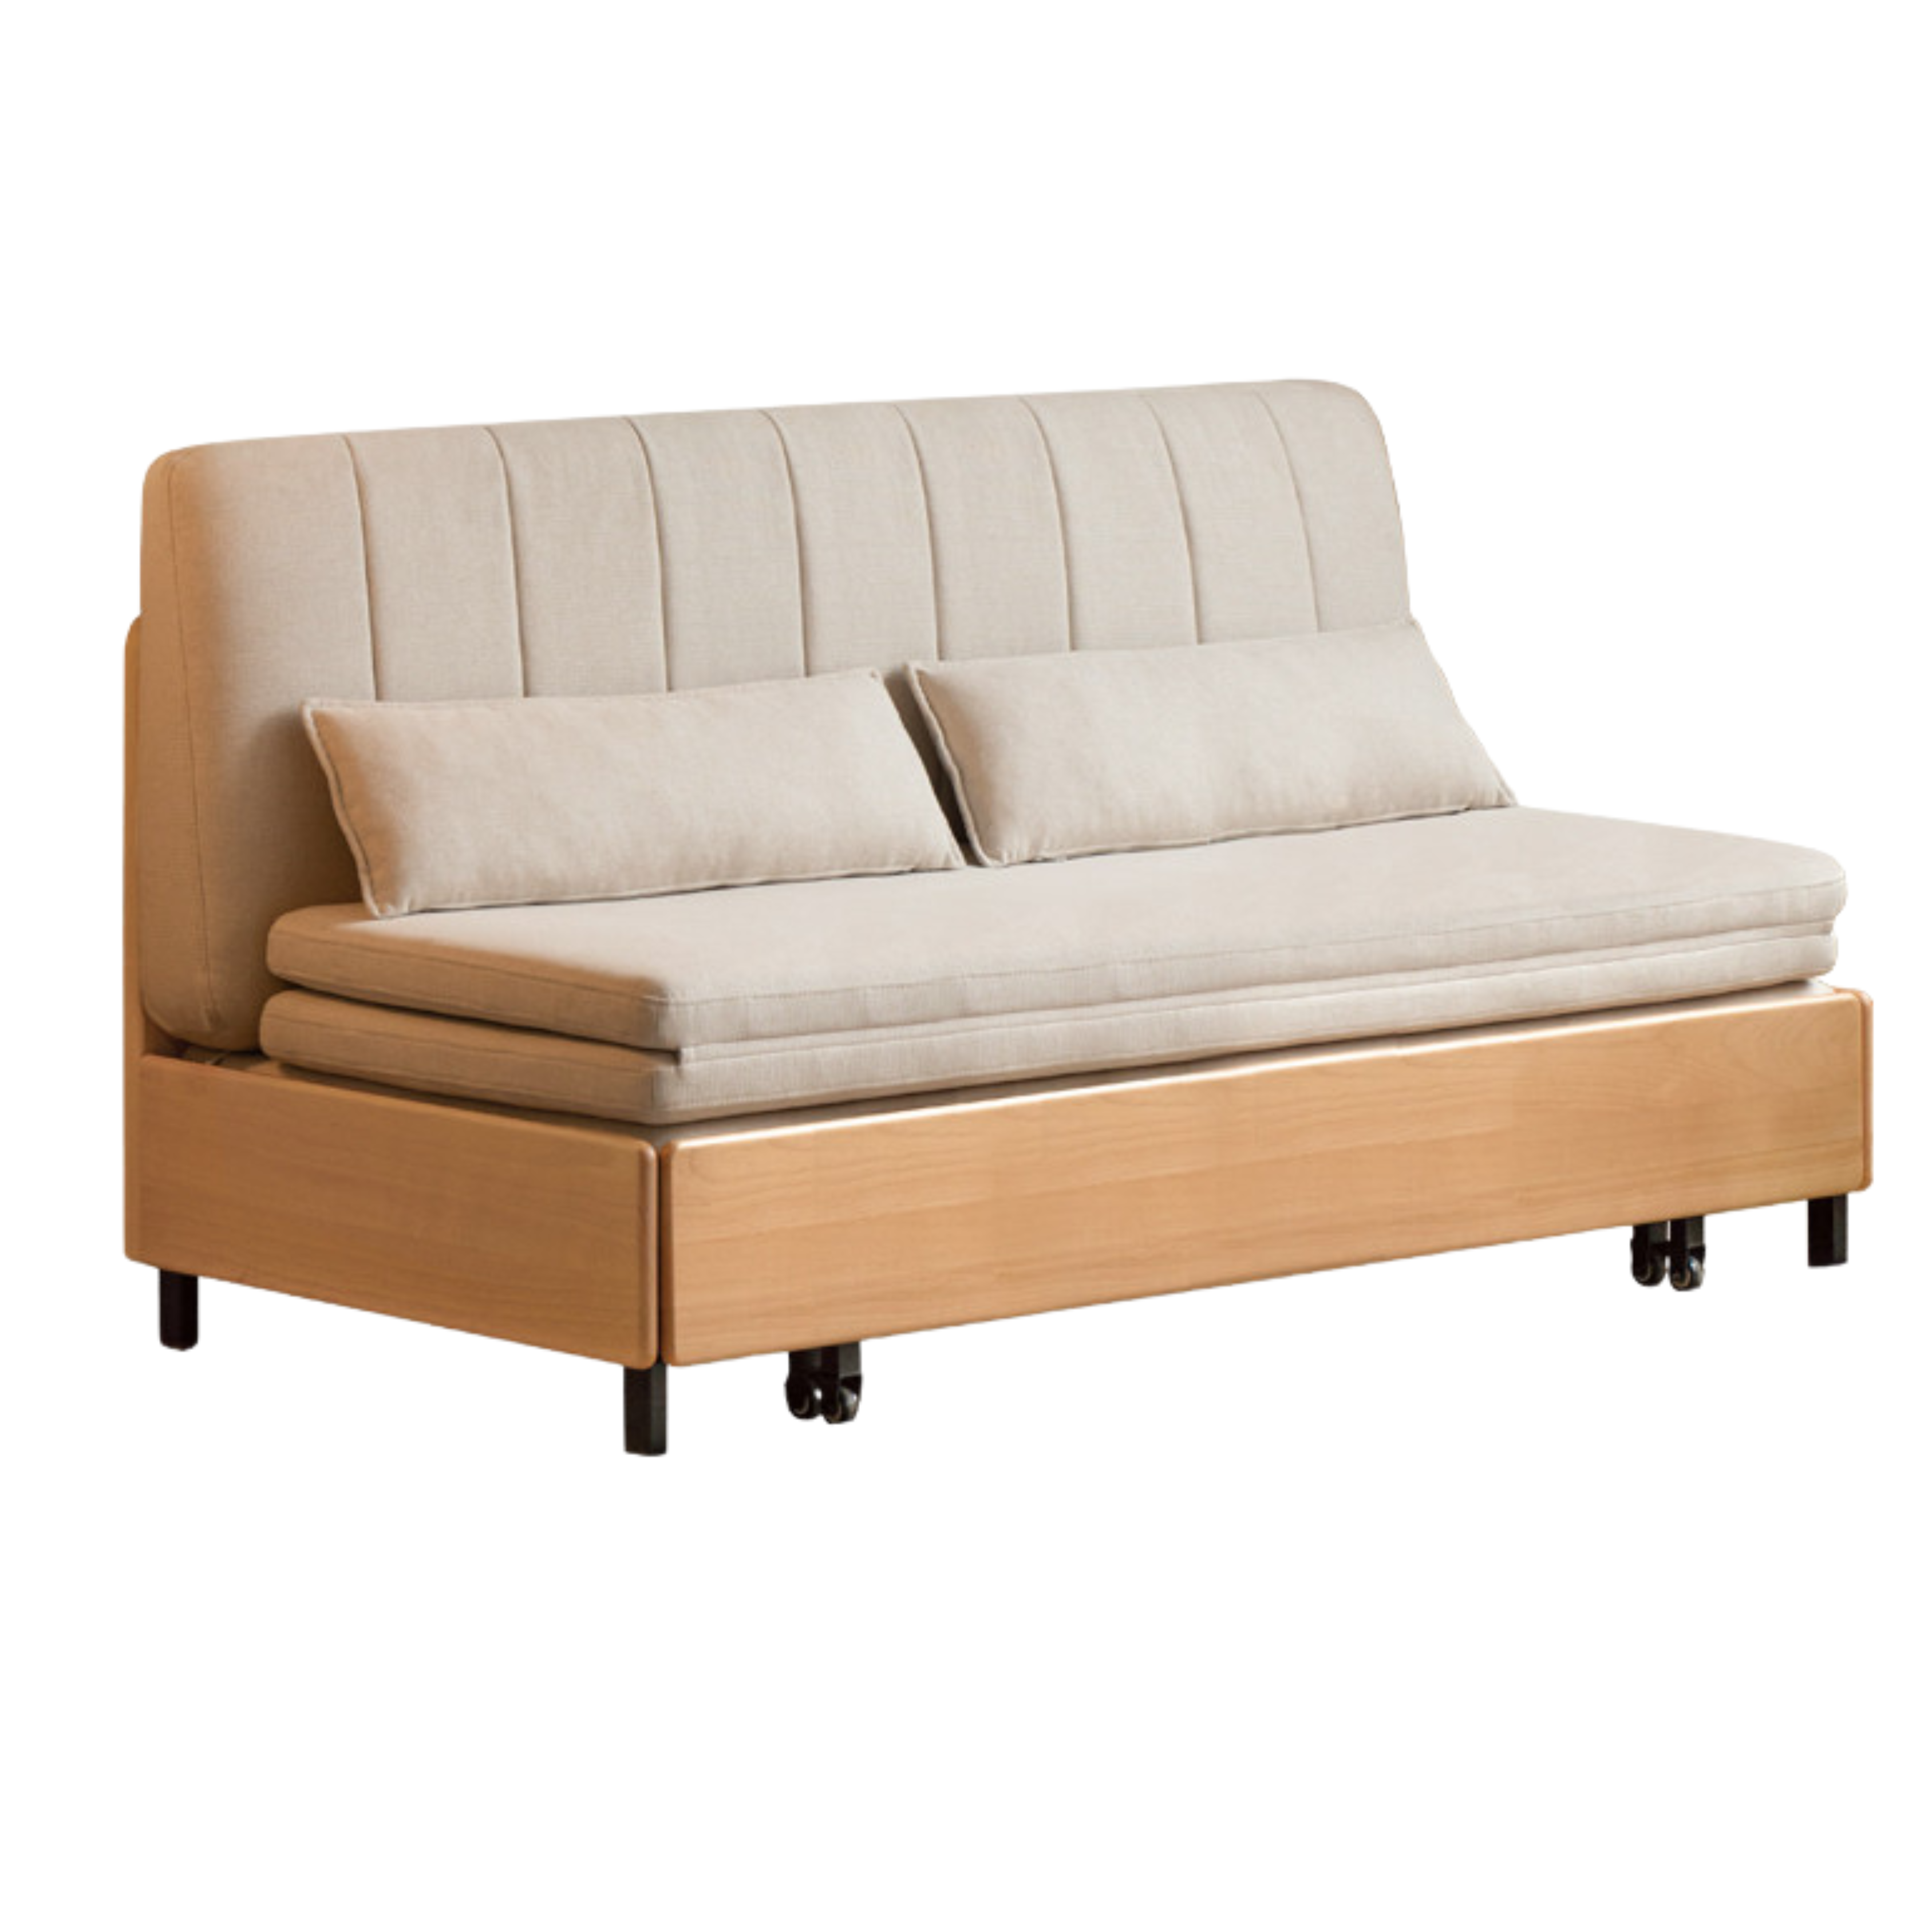 Beech solid wood retractable fabric sofa bed